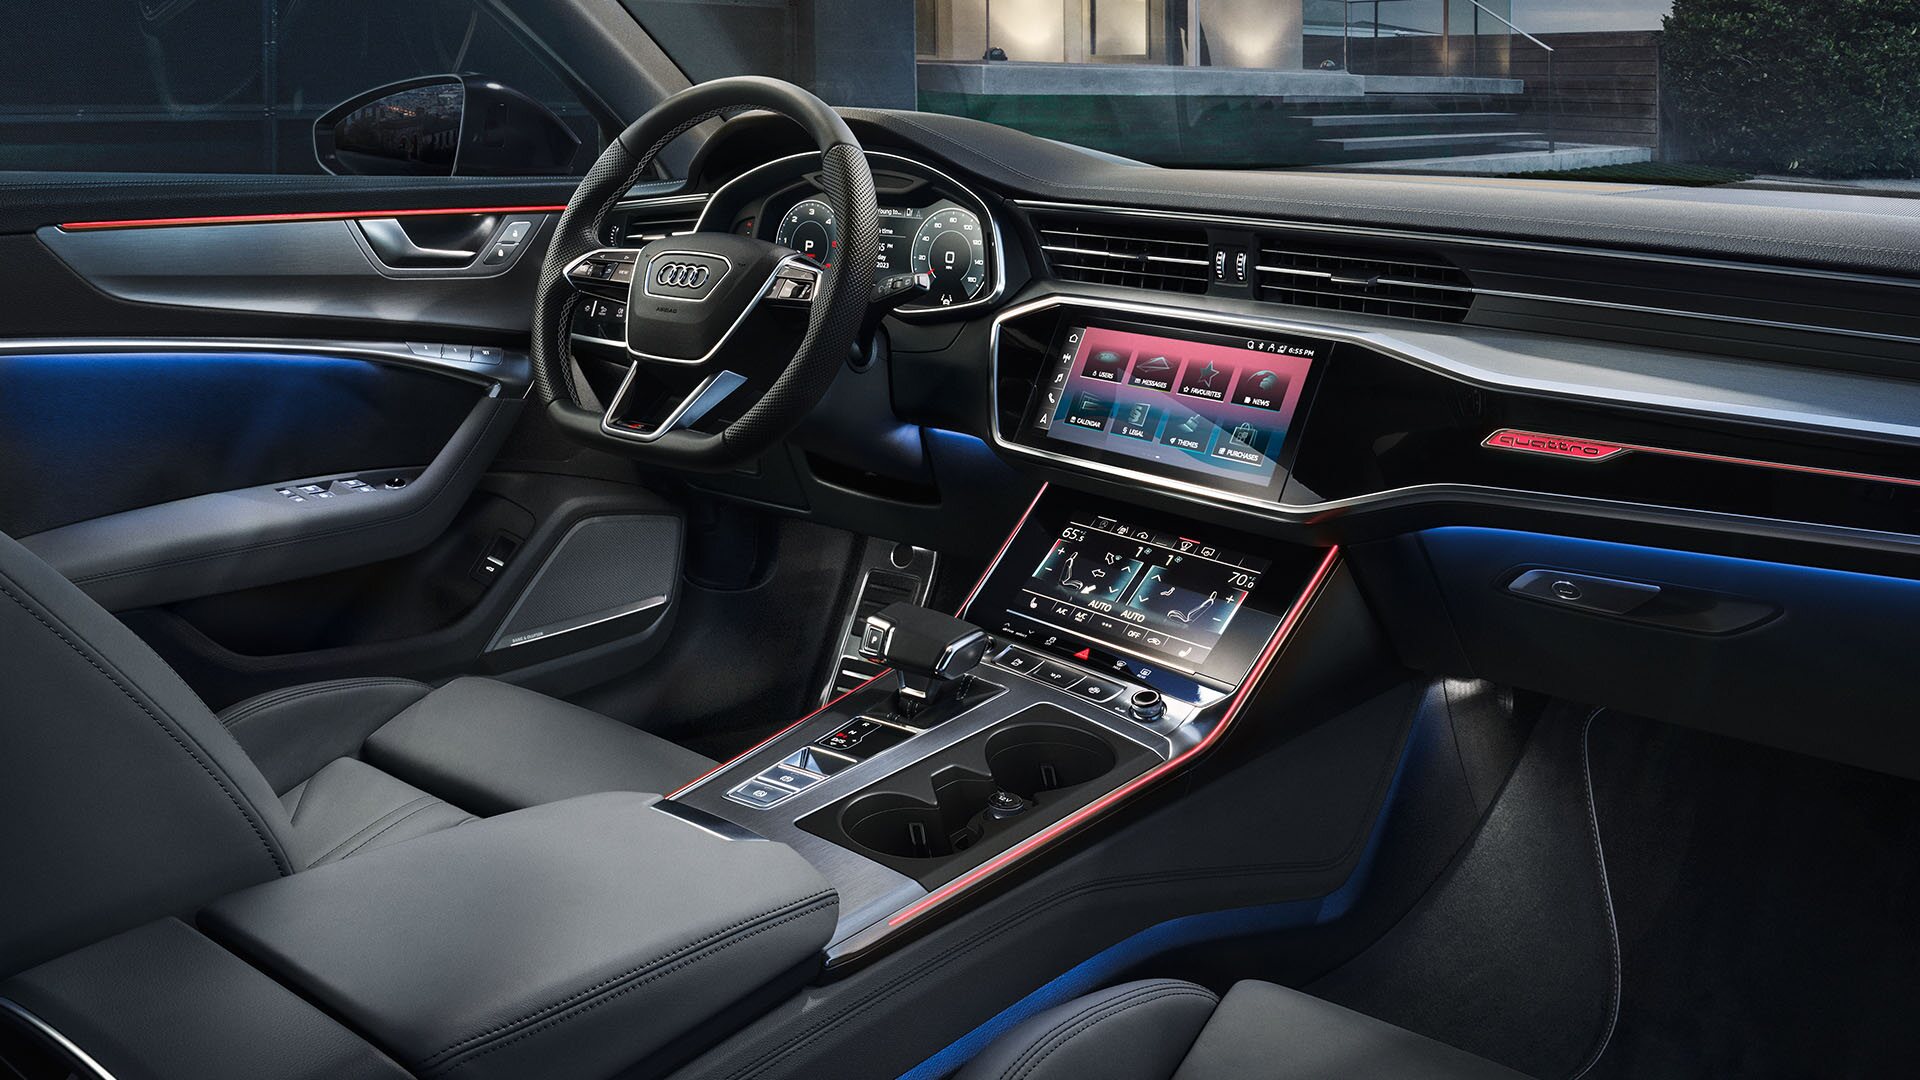 The Interior, Steering, Dashboard, And Central Console Of An Audi E-Tron (Credits Audi)